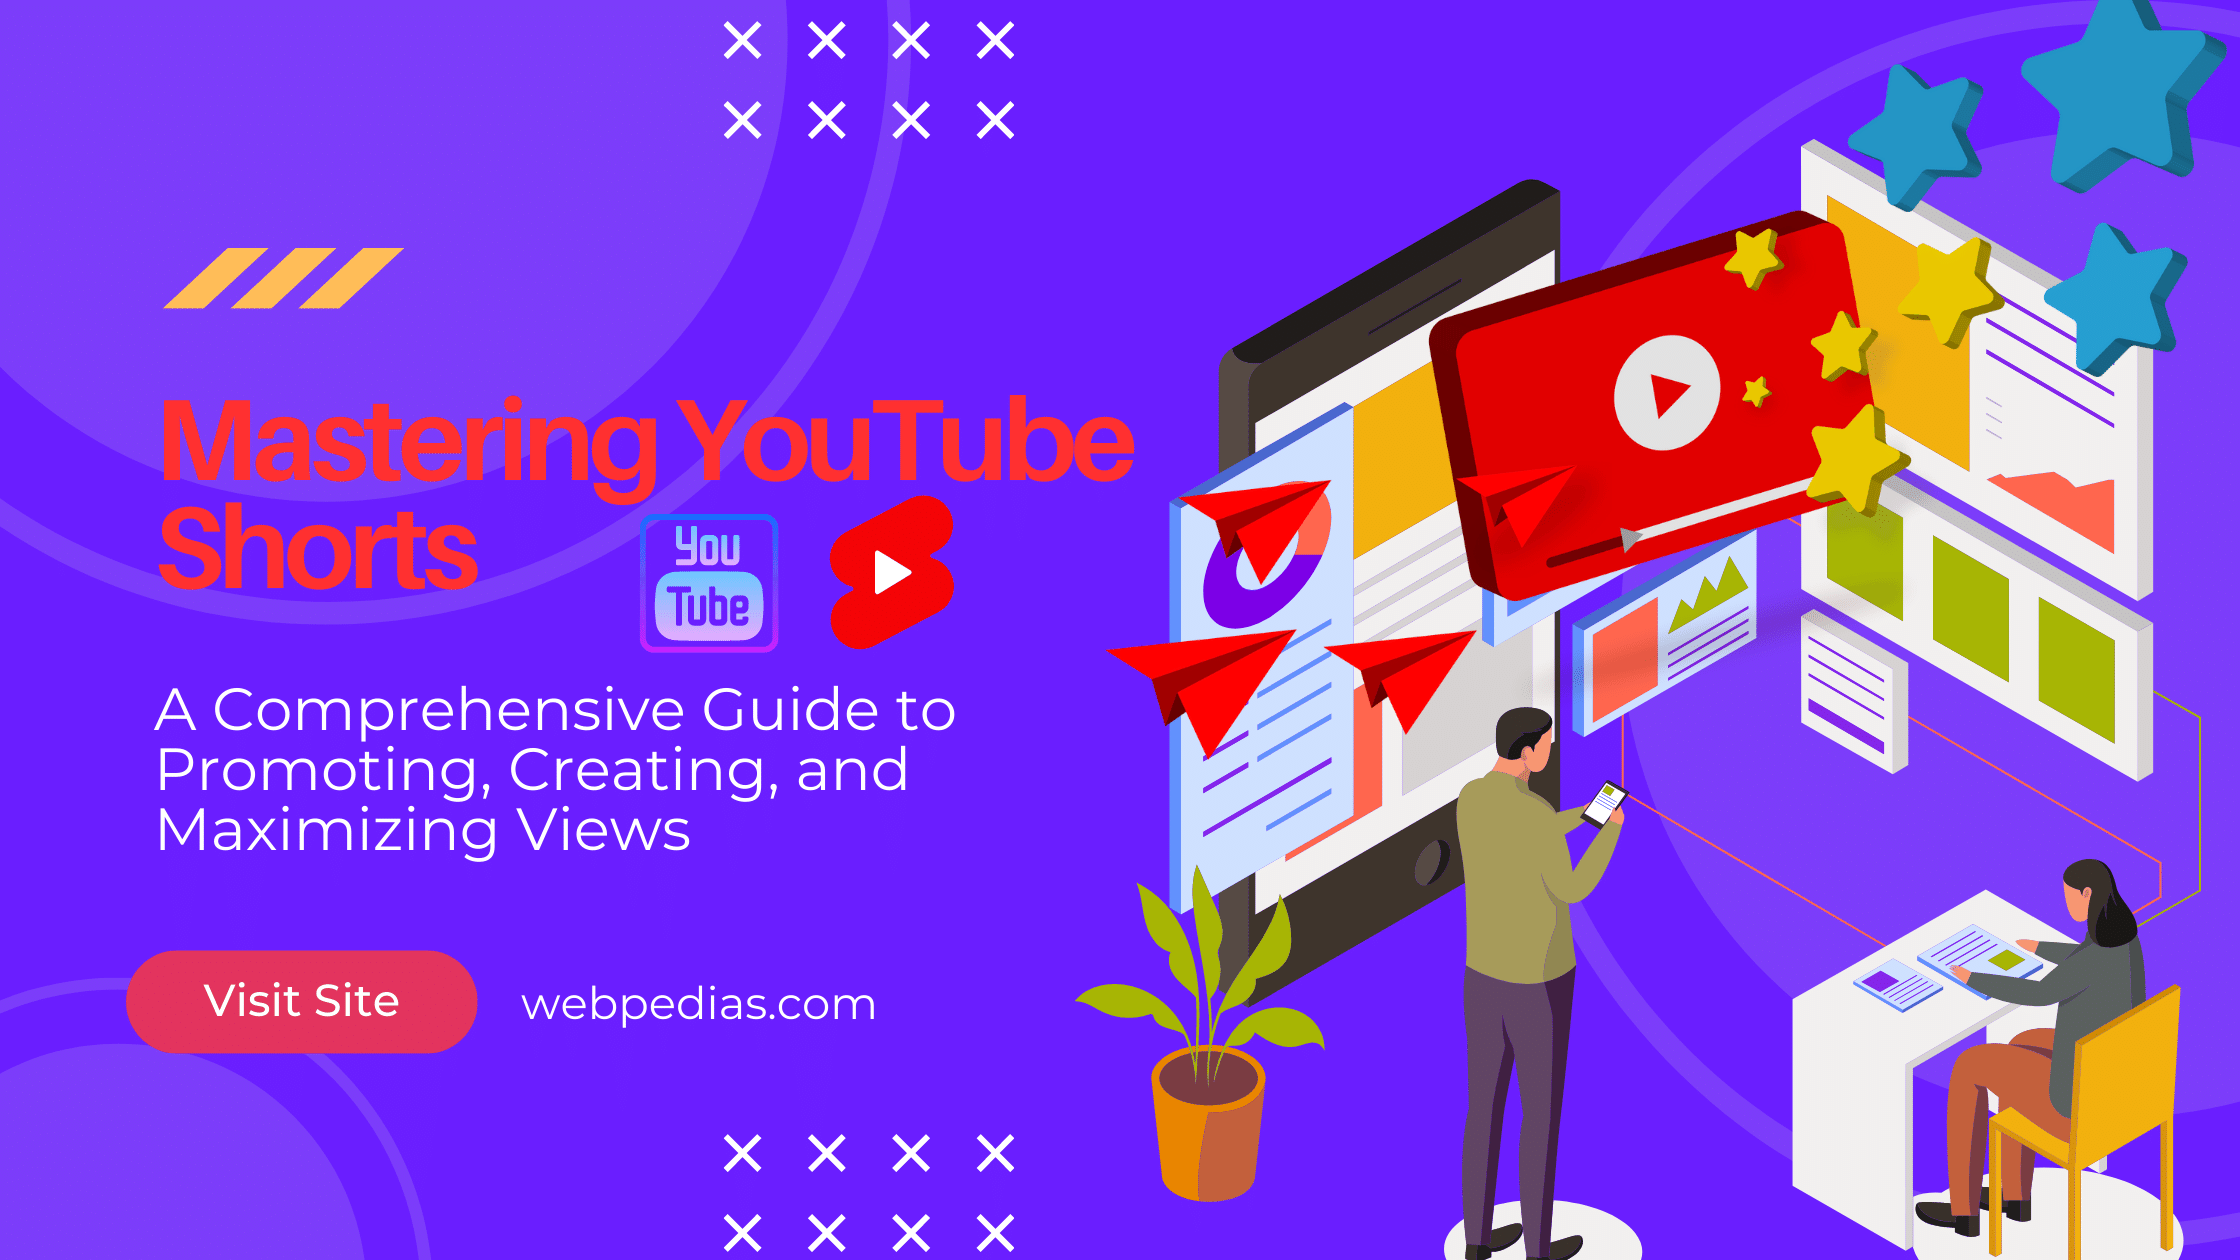 Mastering YouTube Shorts: A Comprehensive Guide to Promoting, Creating, and Maximizing Views